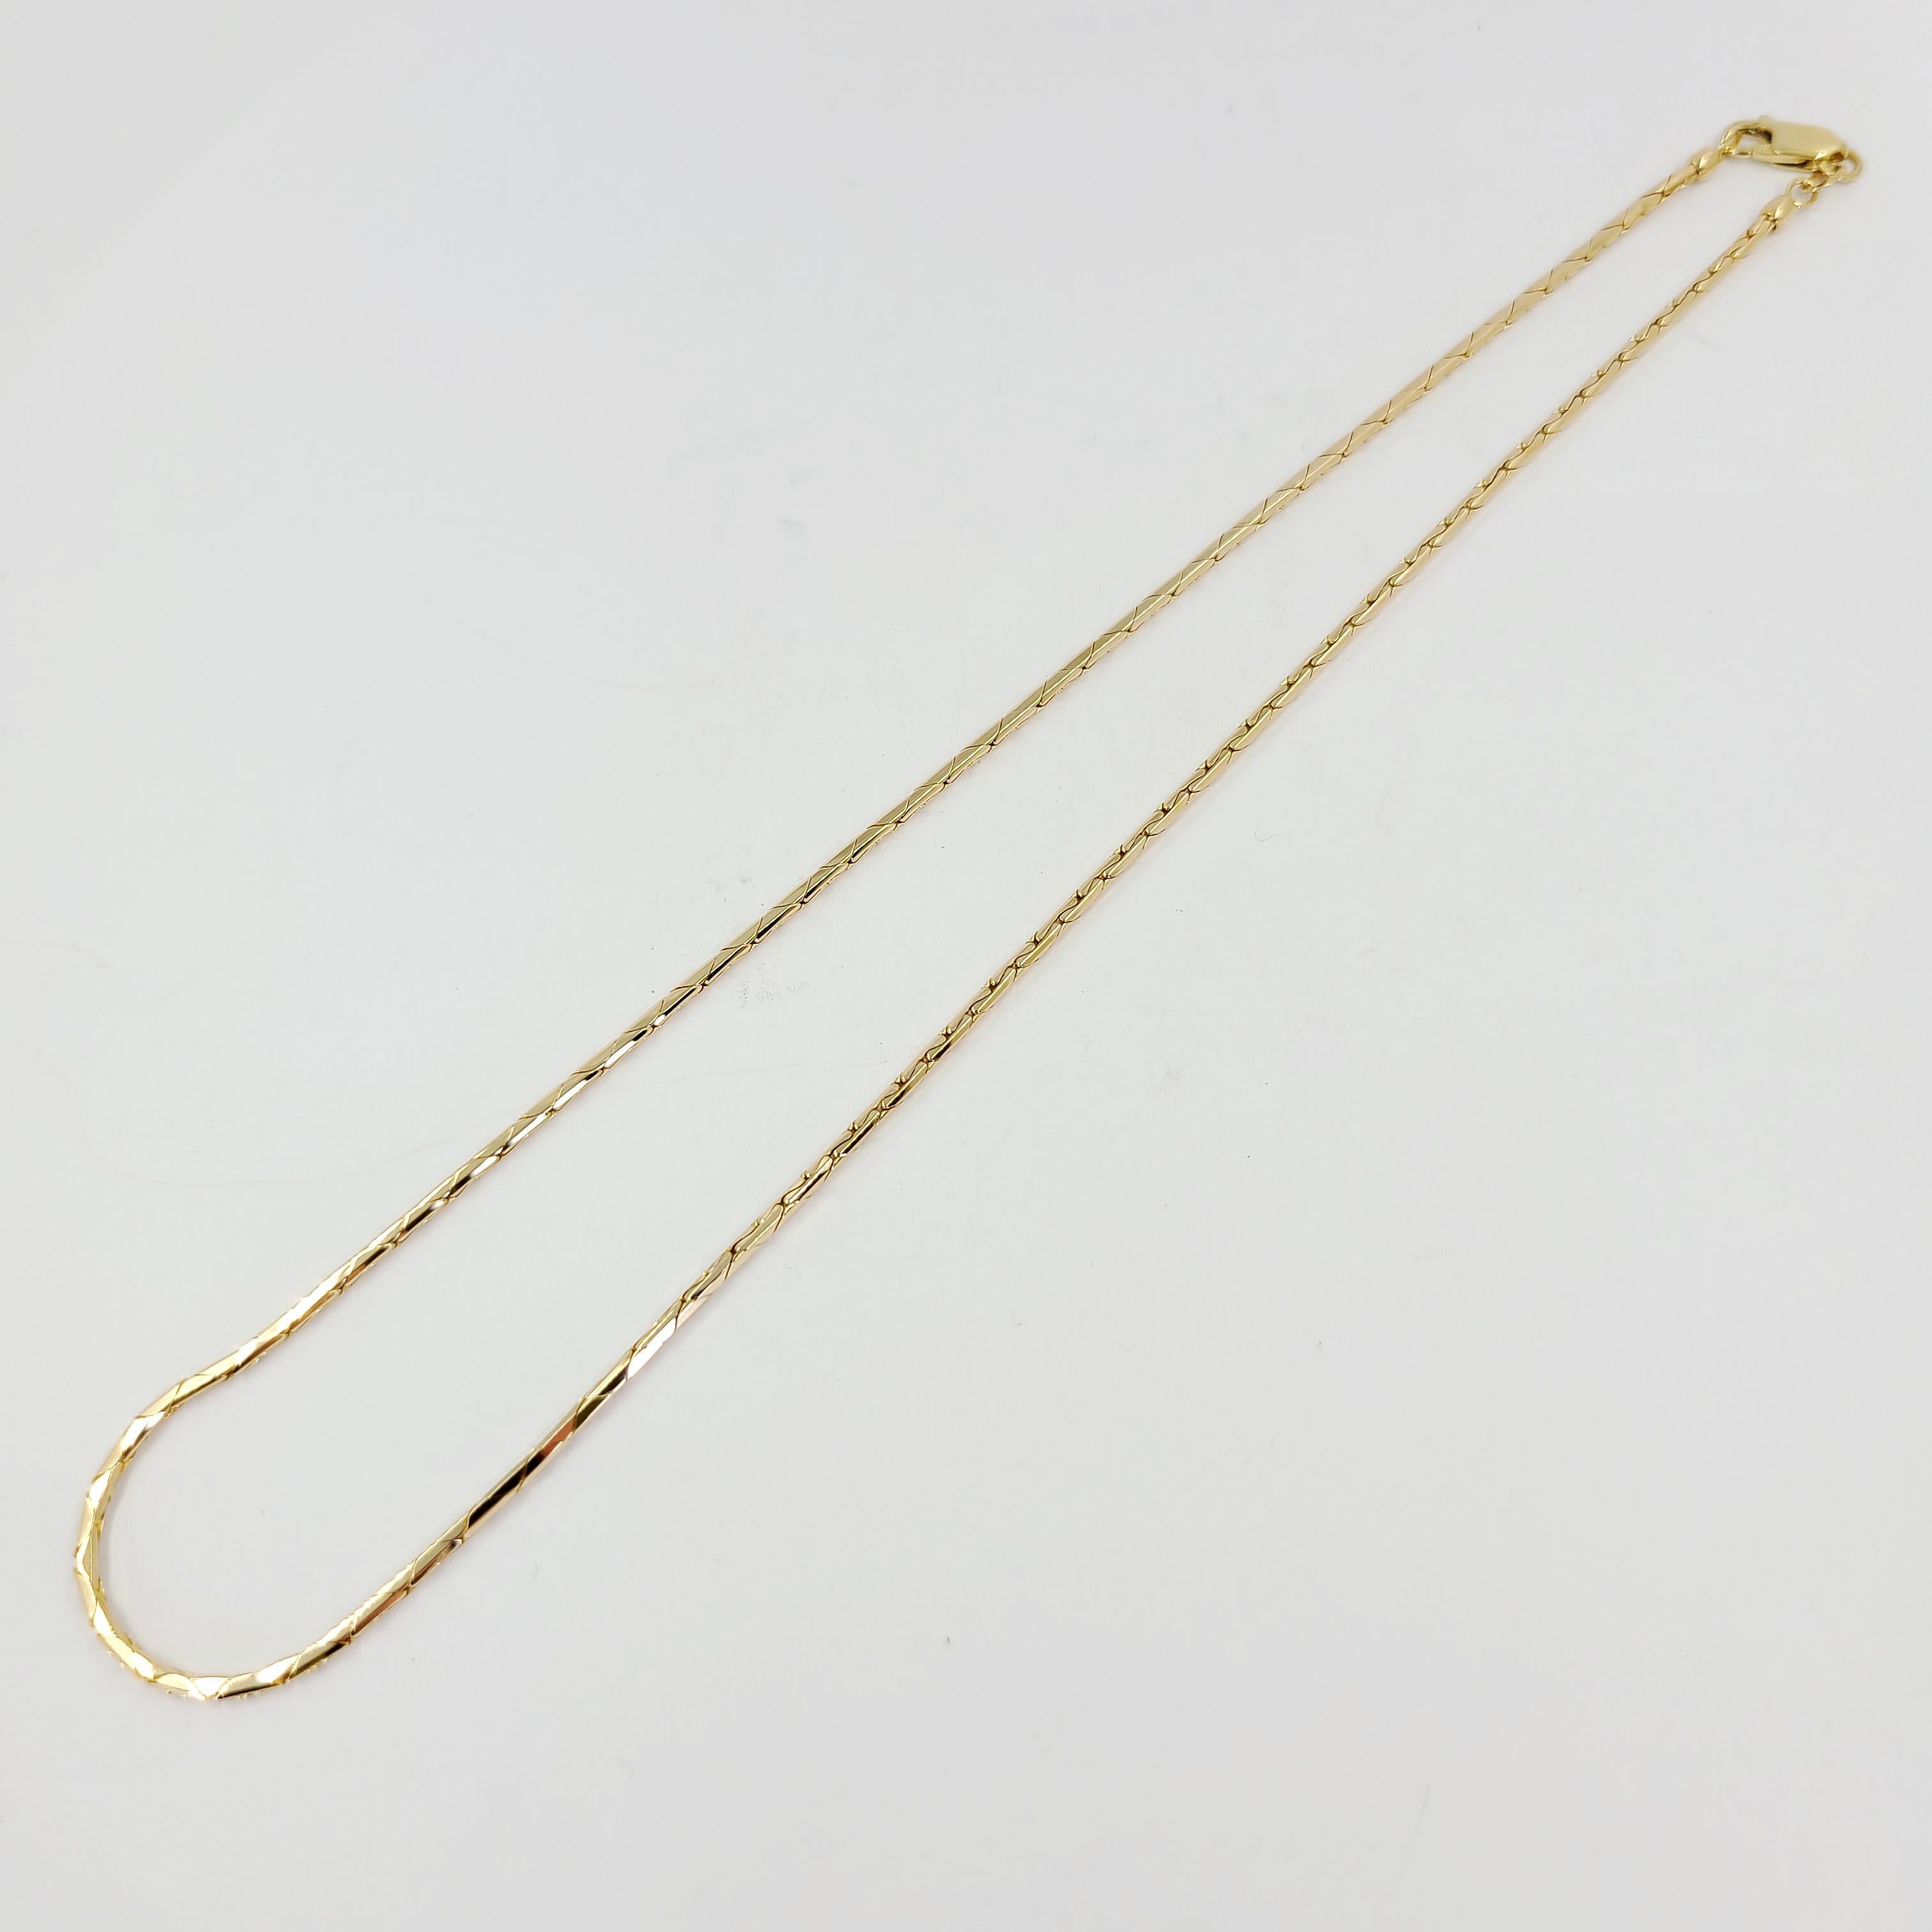 14 Karat Yellow Gold Articulated High Polish Chain Measuring 1.7mm Wide & 16 Inches Long. Lobster Clasp Closure. Finished Weight Is 10.5 Grams.